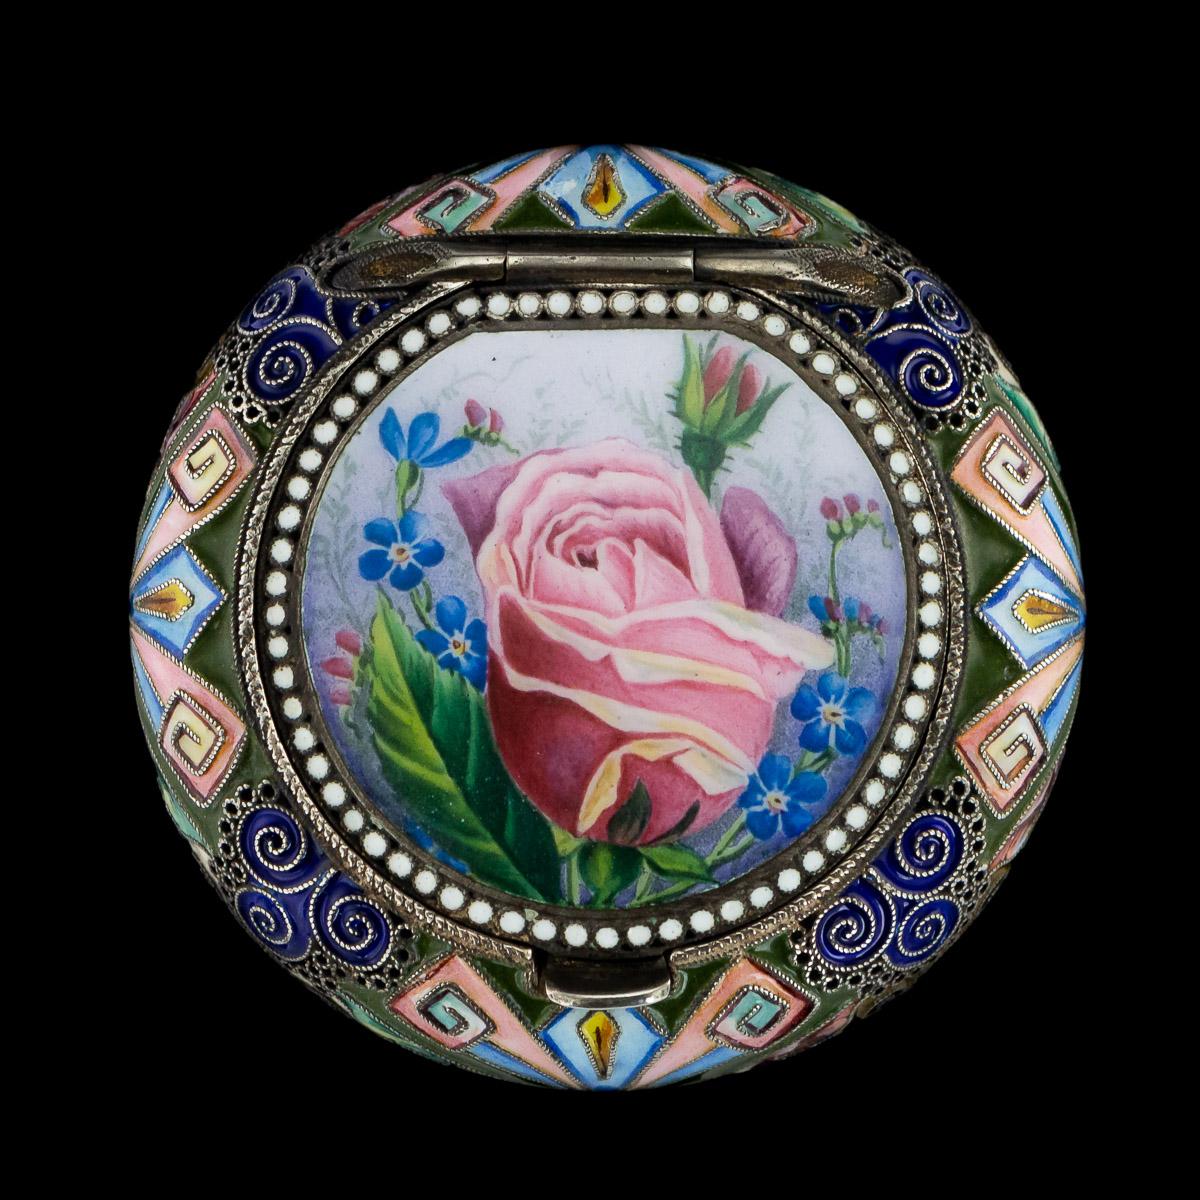 Antique early 20th century Imperial Russian solid silver and hand painted enamel, cushion shaped pill box, all side decorated with traditional Russian stylised flowers, foliage, geometric designs in polychrome cloisonne' enamel, the lid is hand